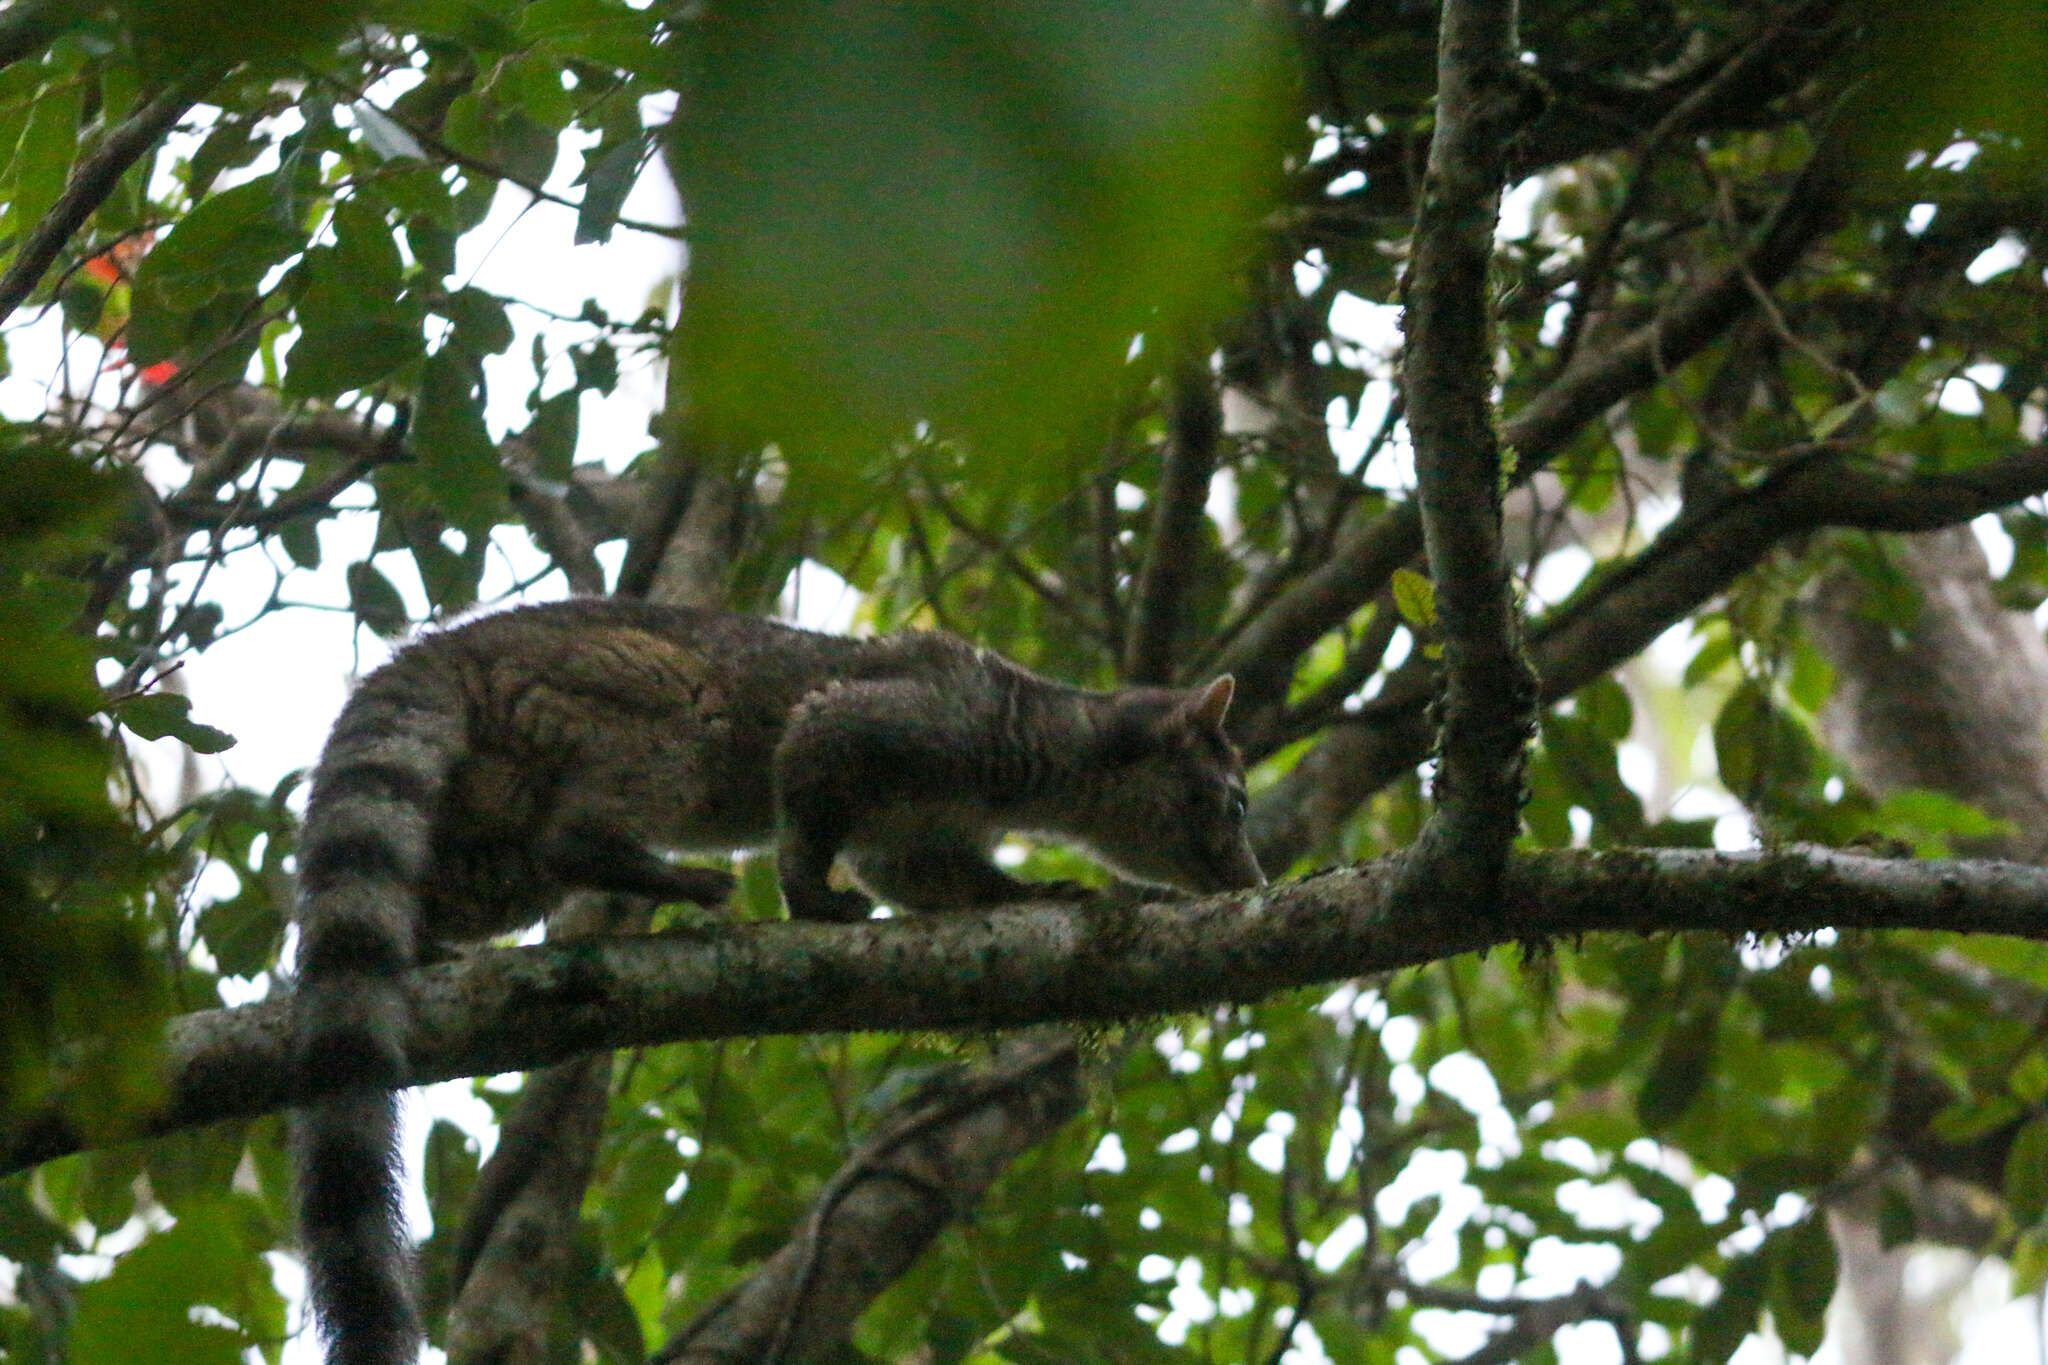 Image of Central American Cacomistle